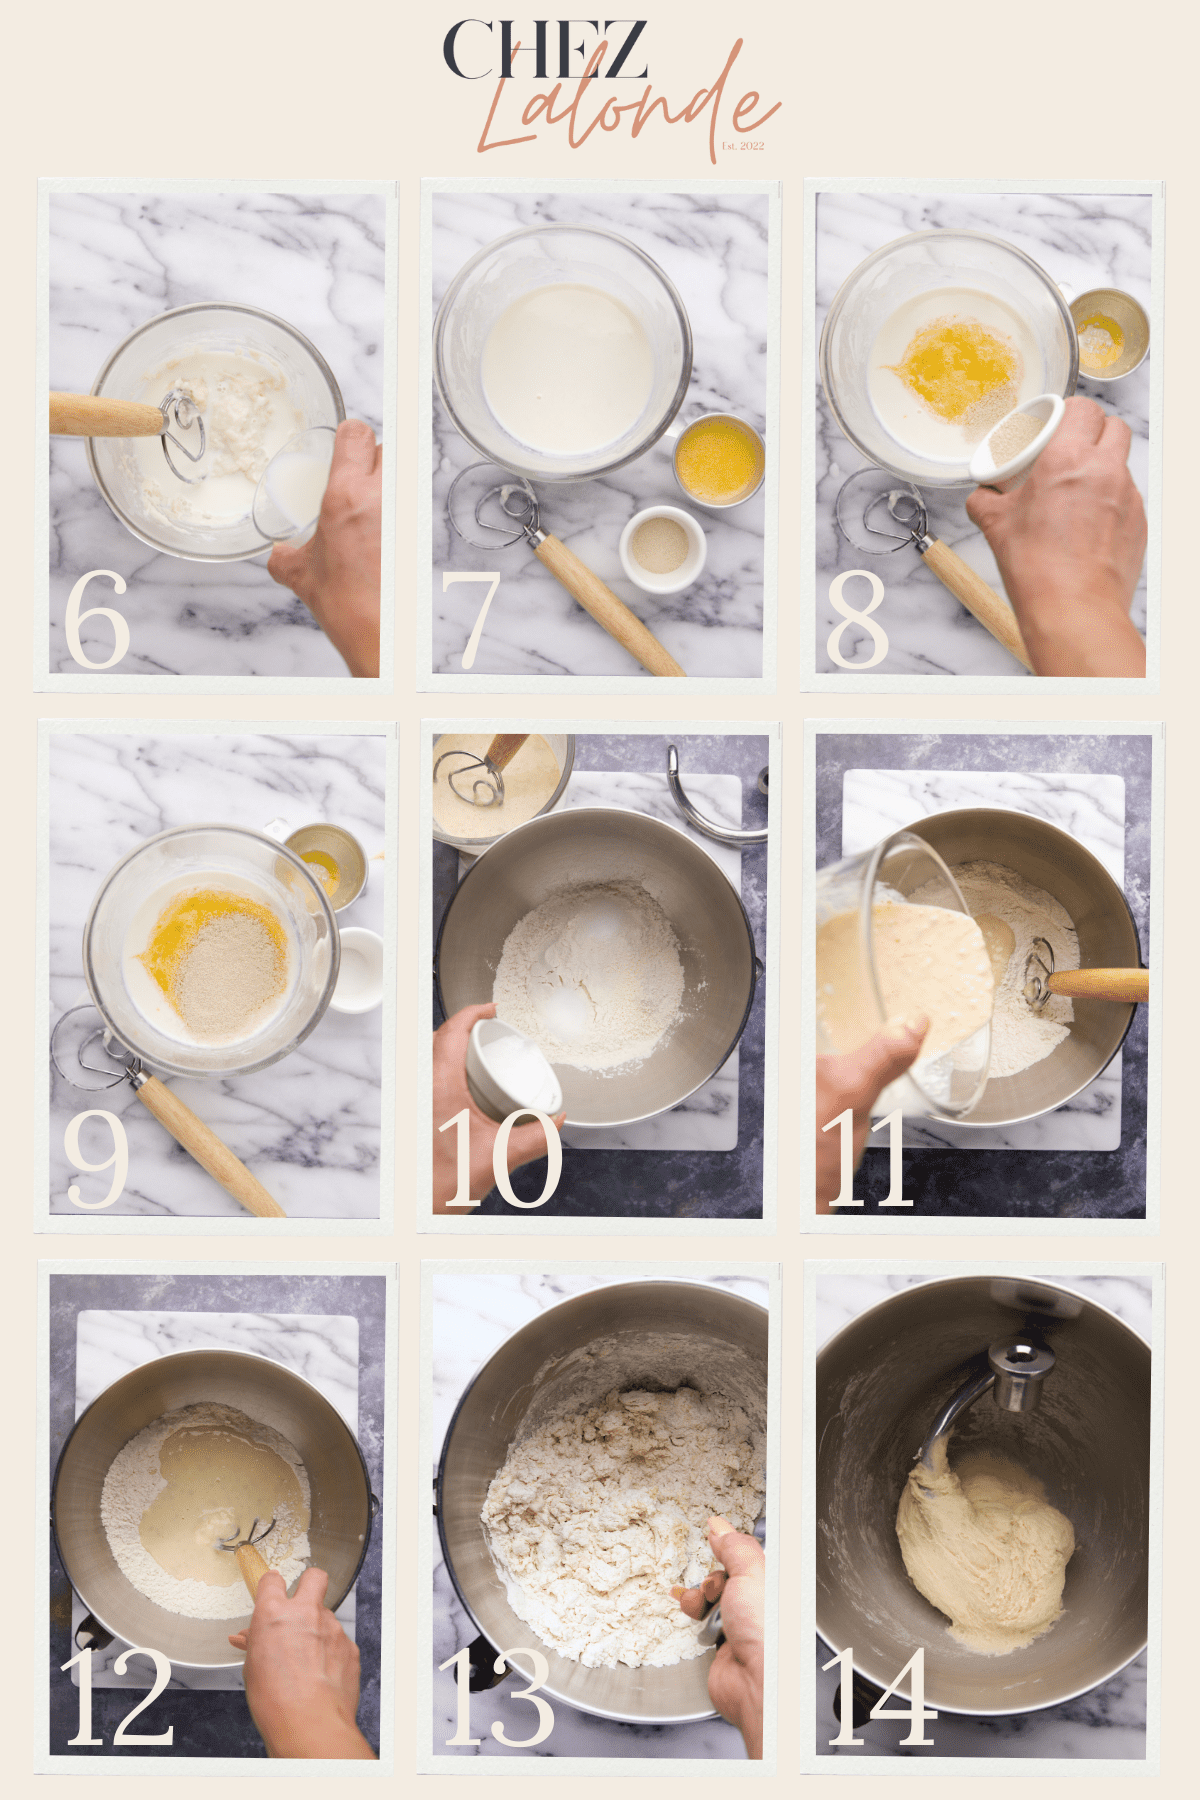 Step by step part 1 on making Japanese Milk Bread.